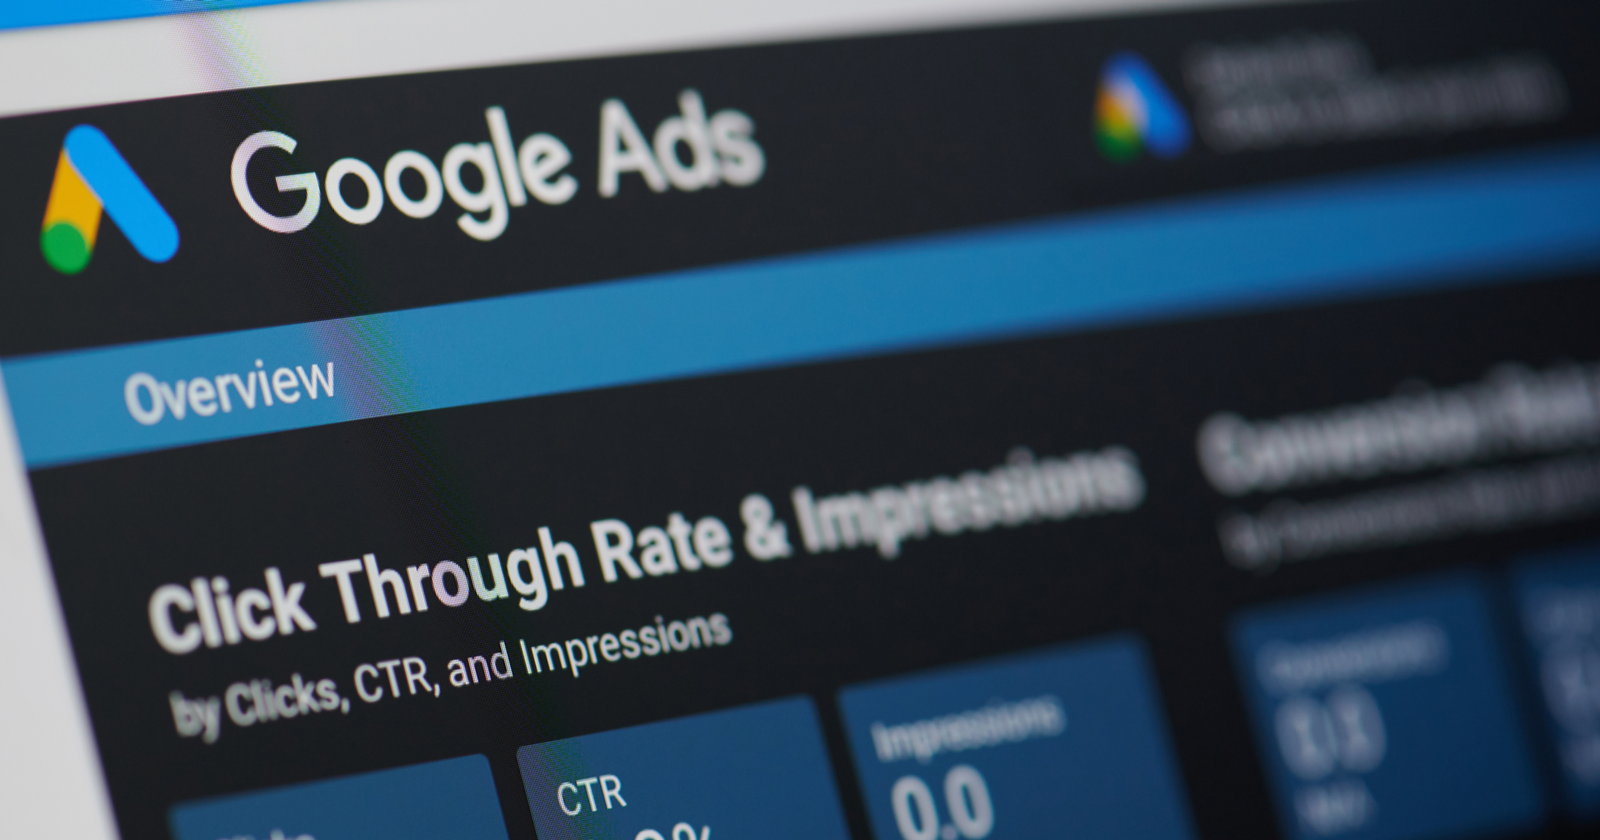 Google Ads Incorporates Retail Category Reporting - Search Engine Journal